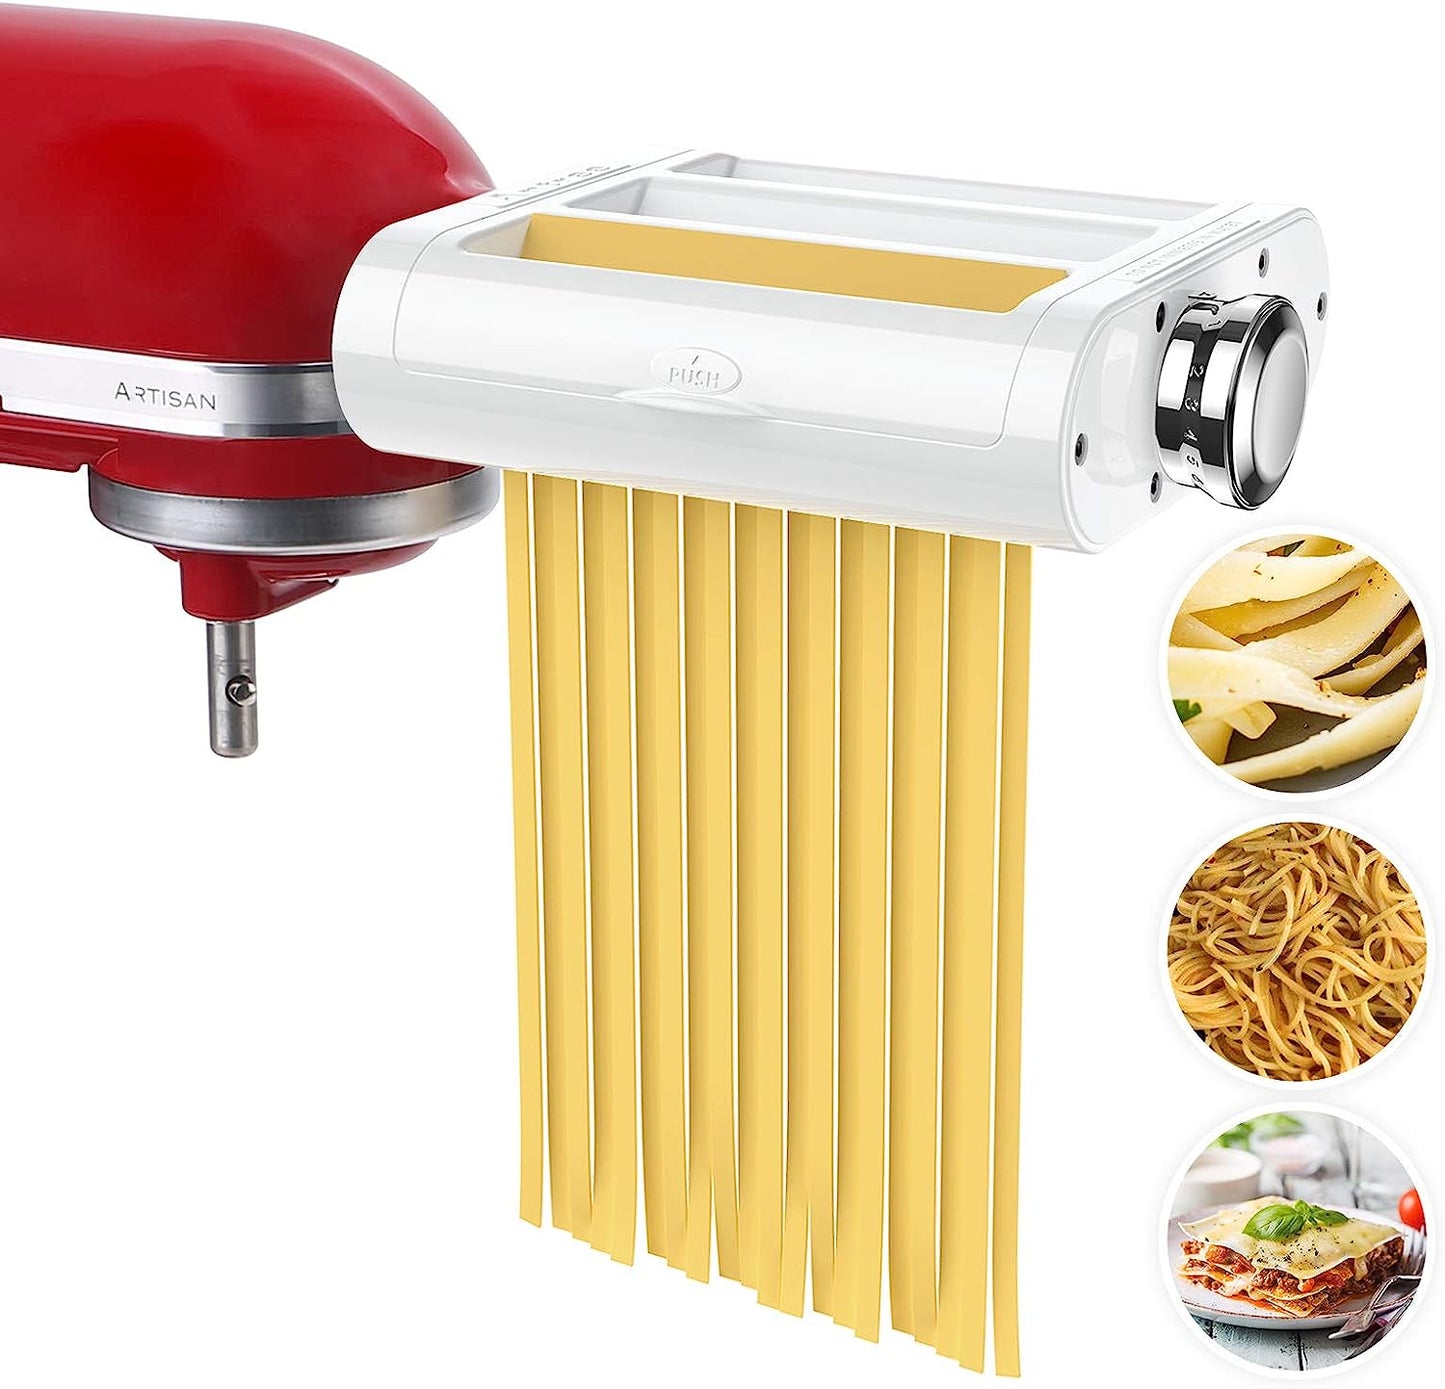 Pasta Maker Attachment 3 in 1 Set for KitchenAid Stand Mixers